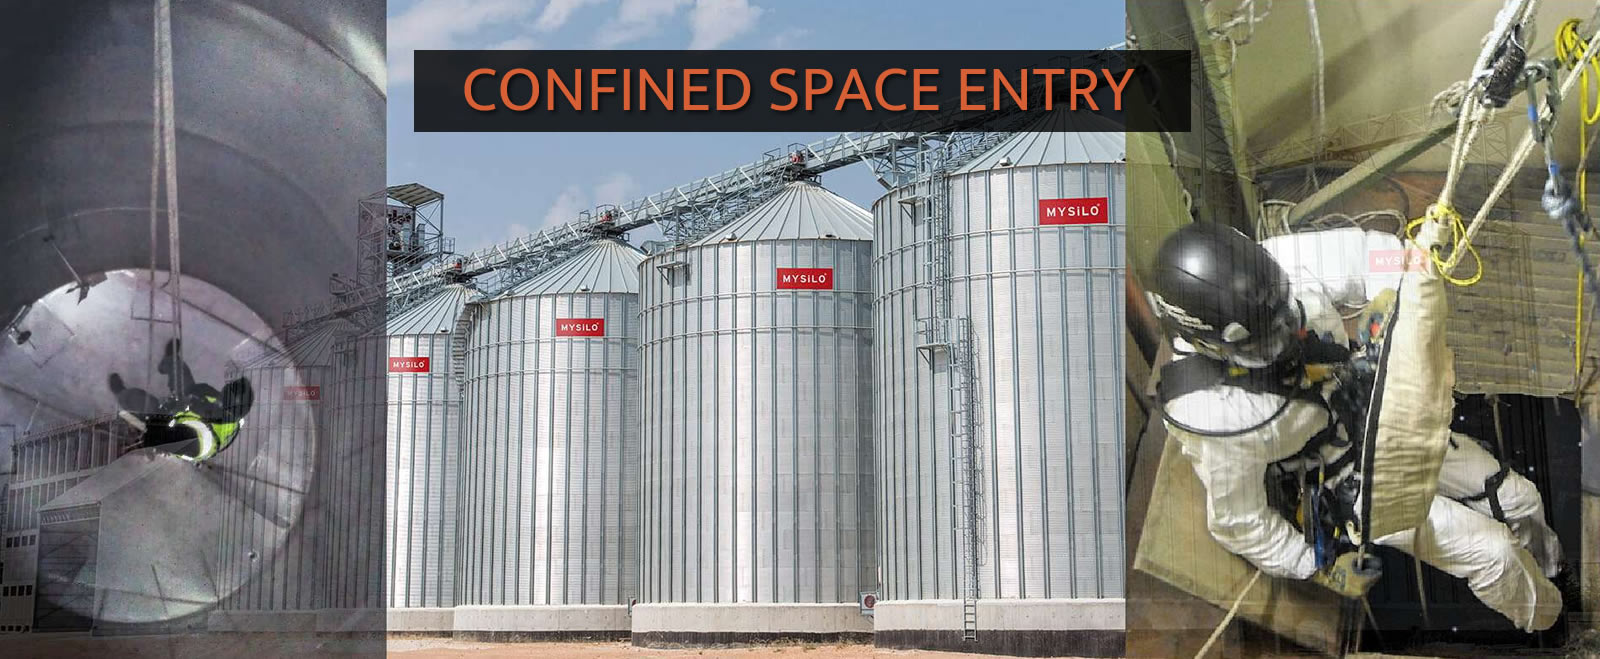 Confined Space and Entry